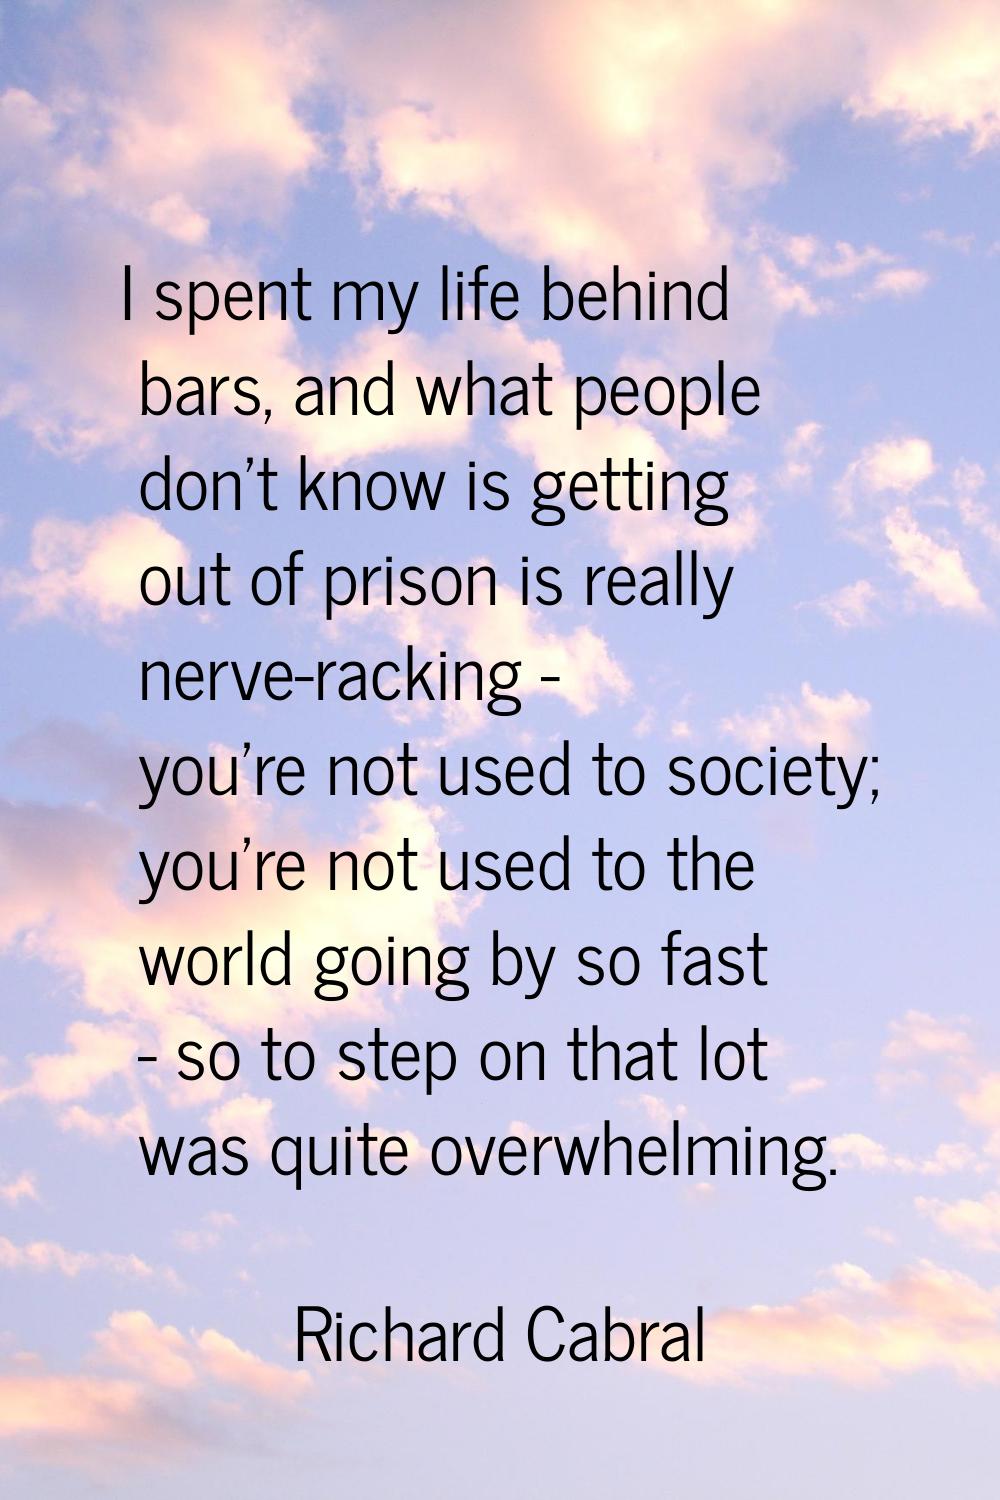 I spent my life behind bars, and what people don't know is getting out of prison is really nerve-ra